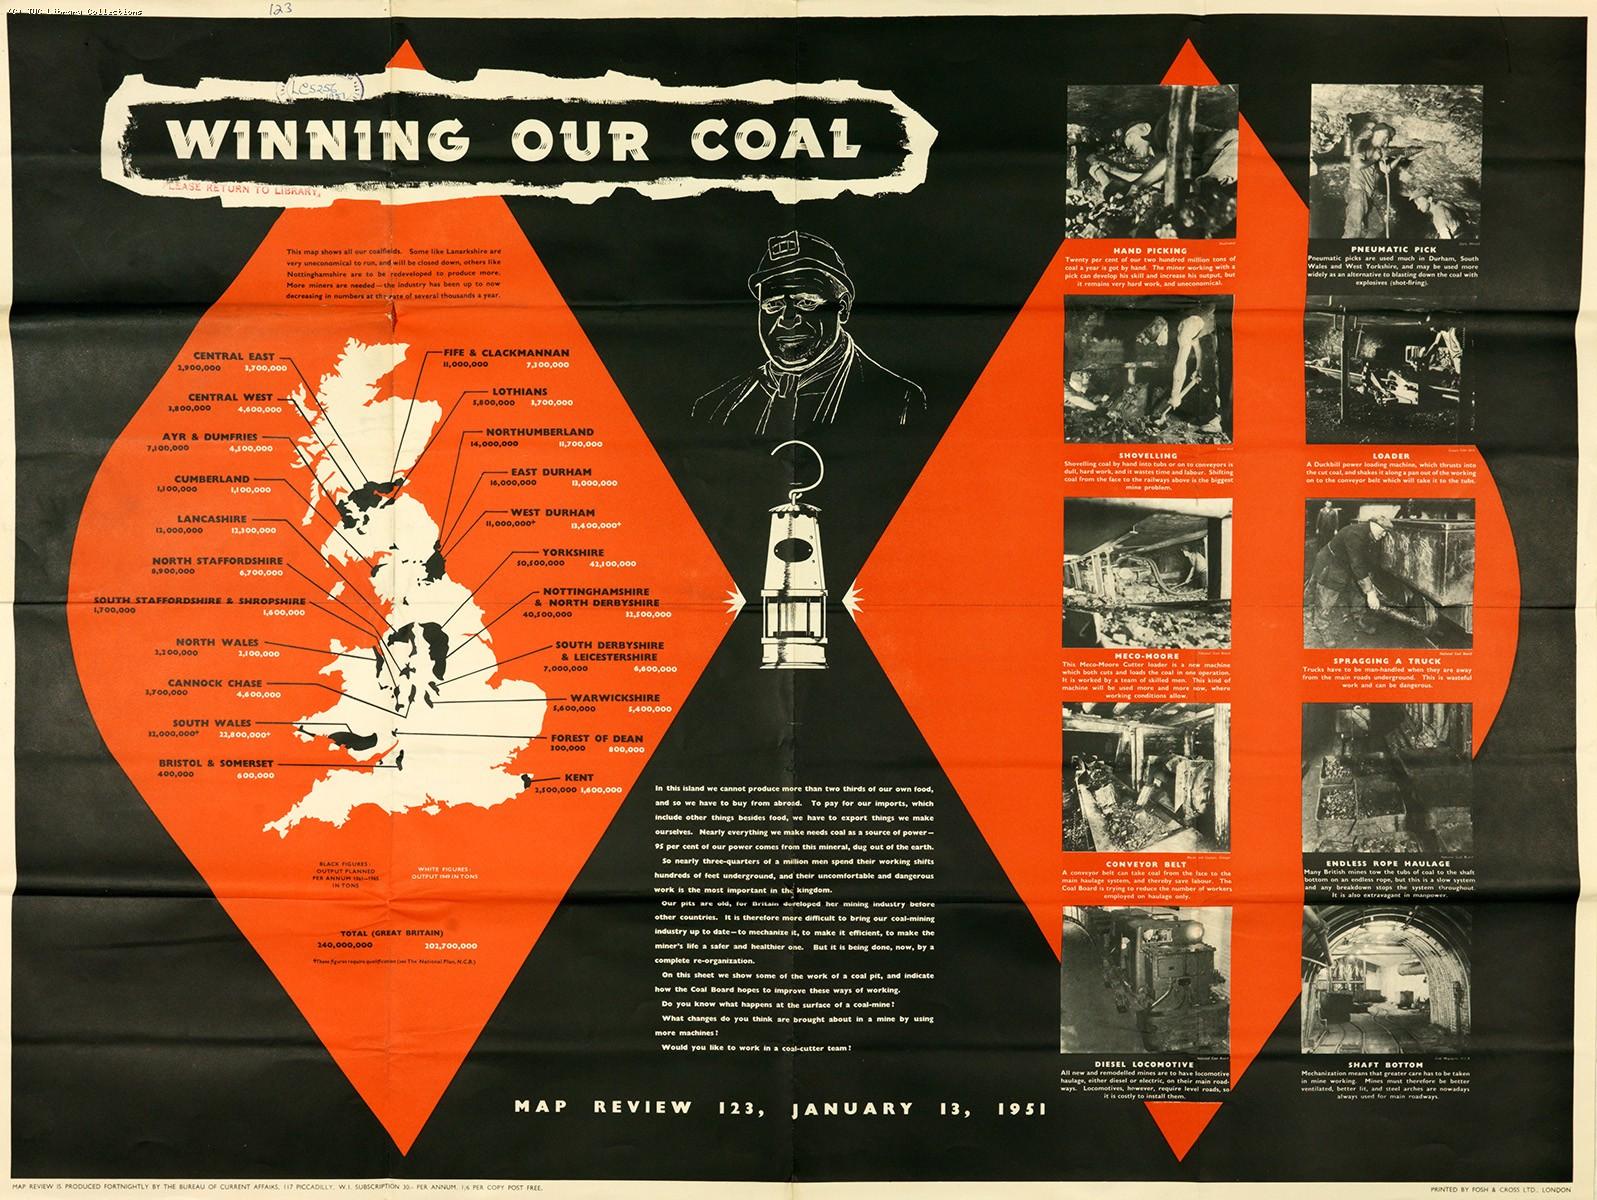 Winning our coal - poster, 1951